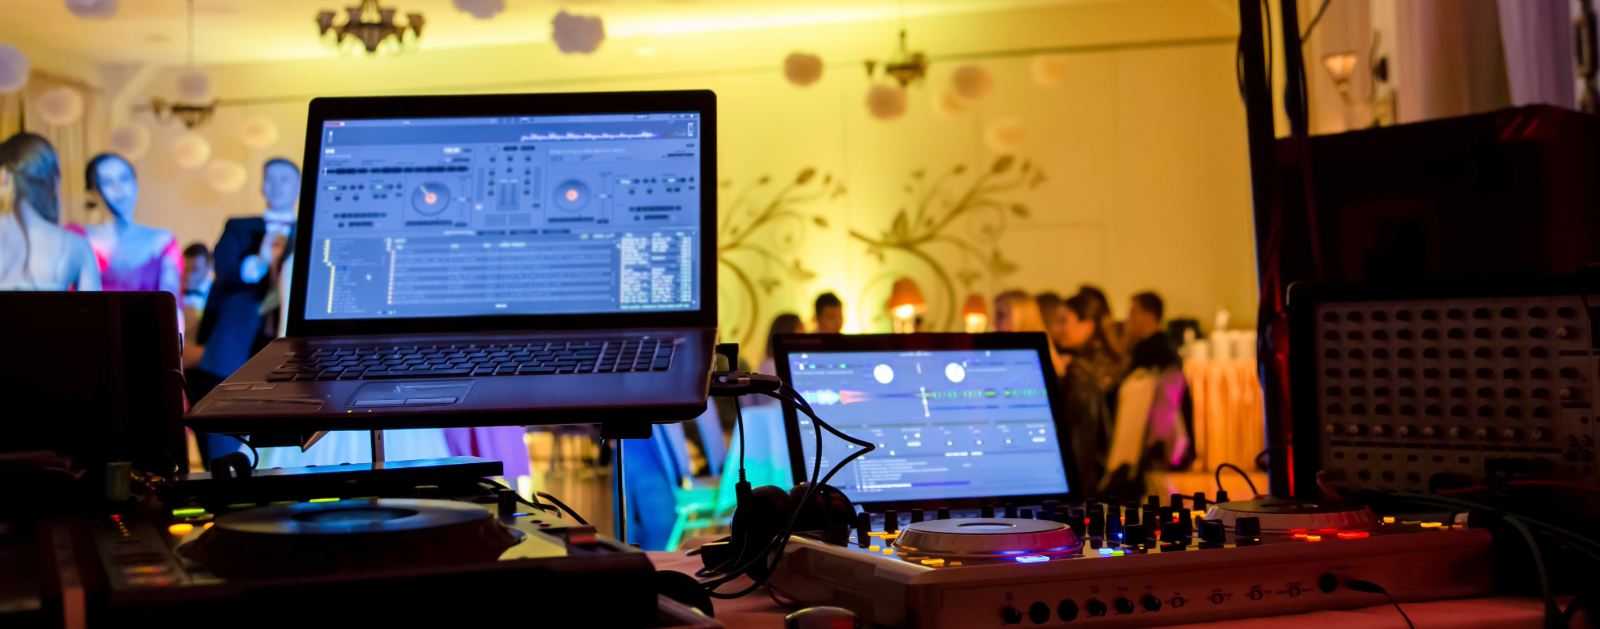 Party DJ booth with two laptops showing the virtual music turntables and party guests in the background.